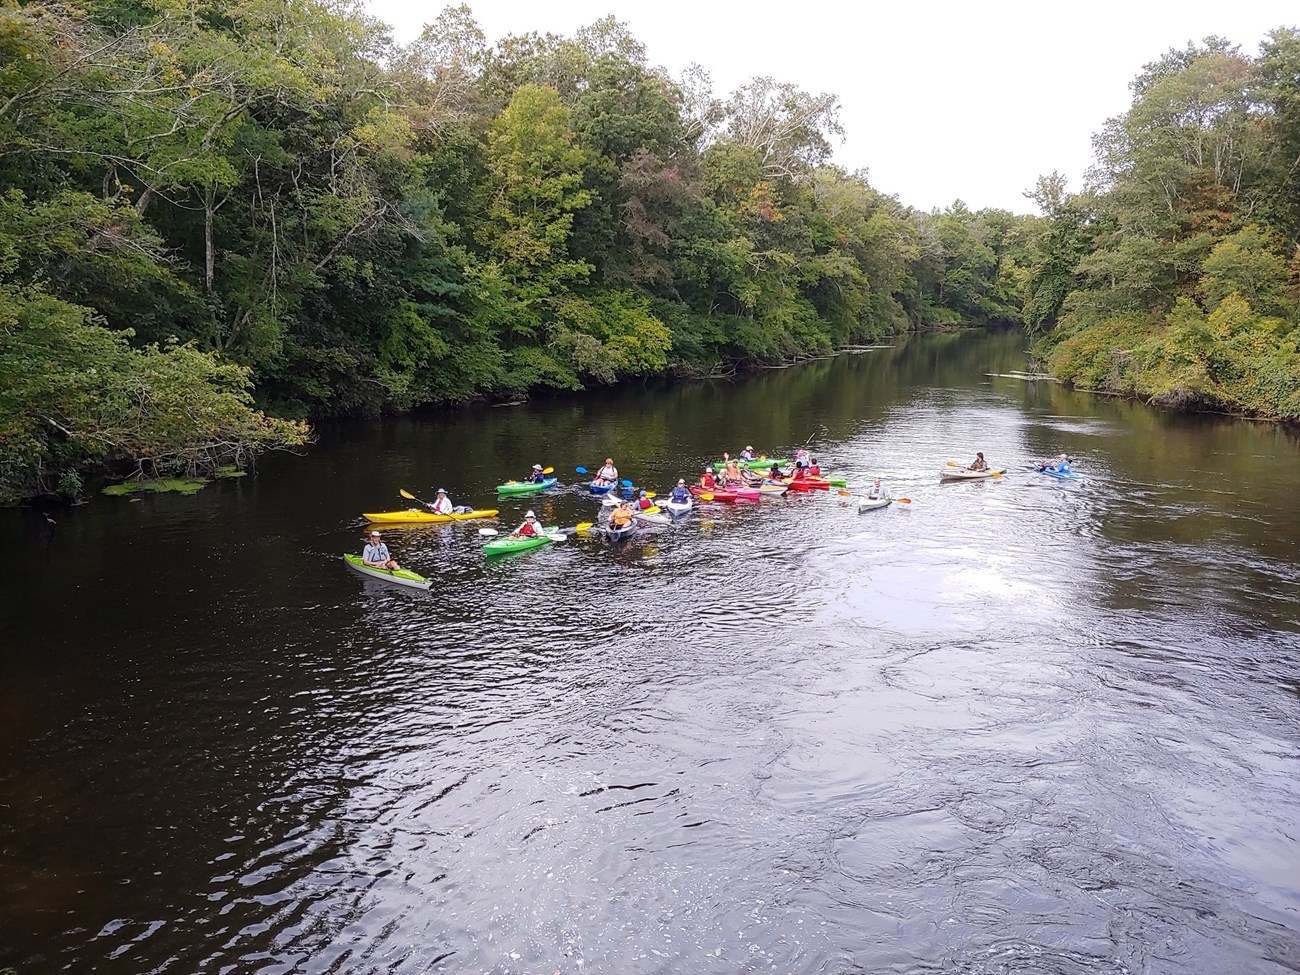 Group of paddlers on the Taunton River by Dick Shafer.